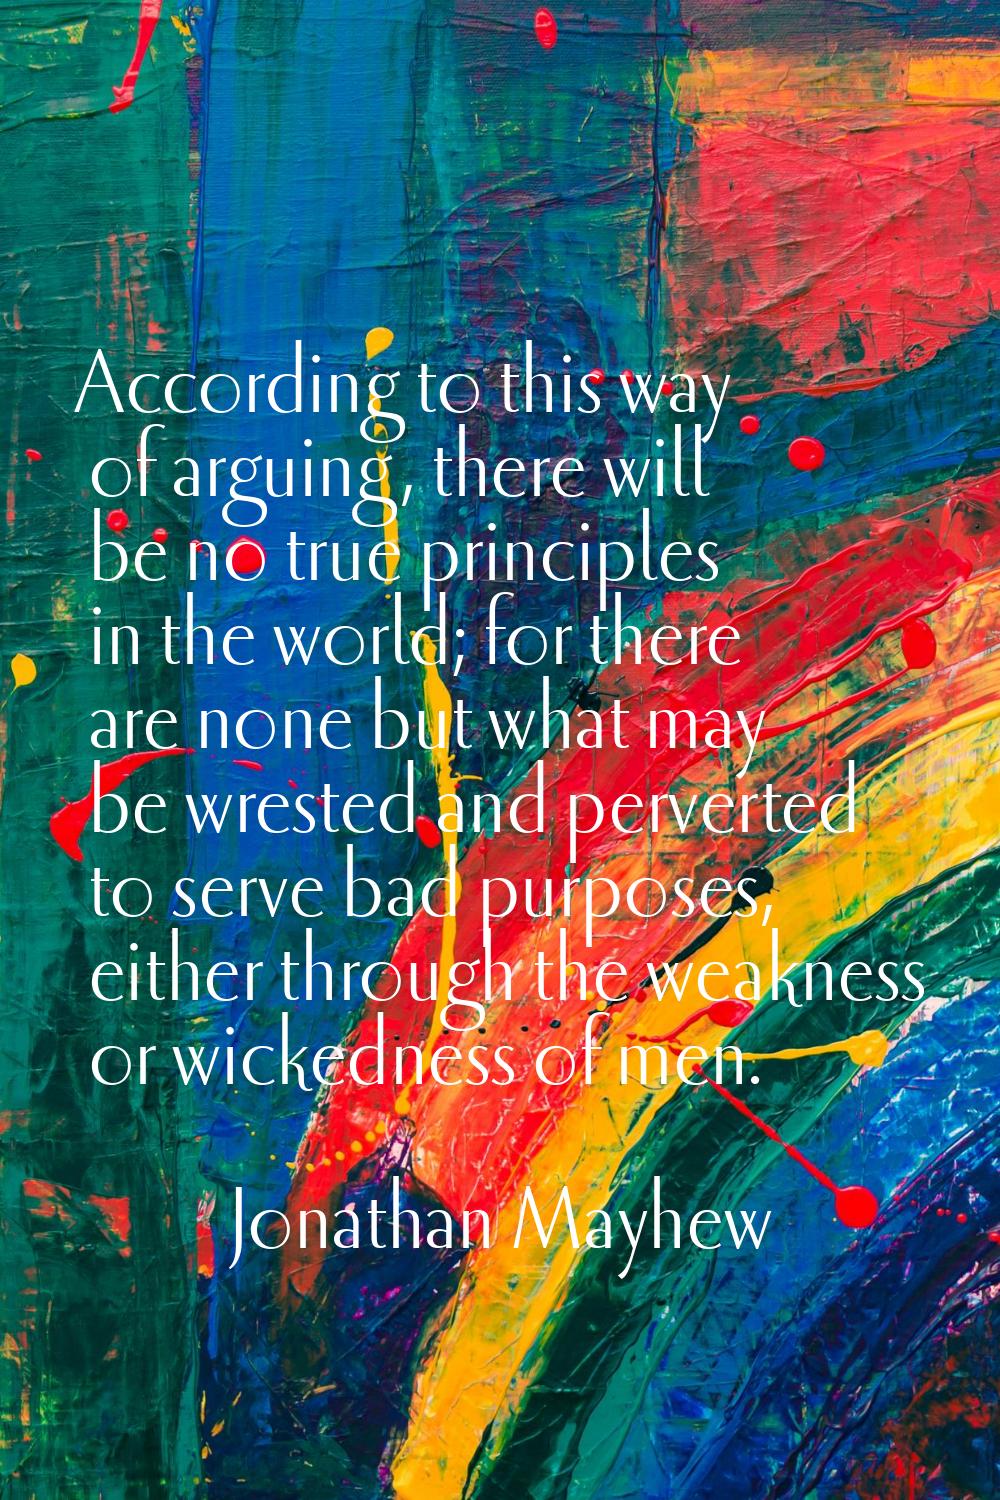 According to this way of arguing, there will be no true principles in the world; for there are none